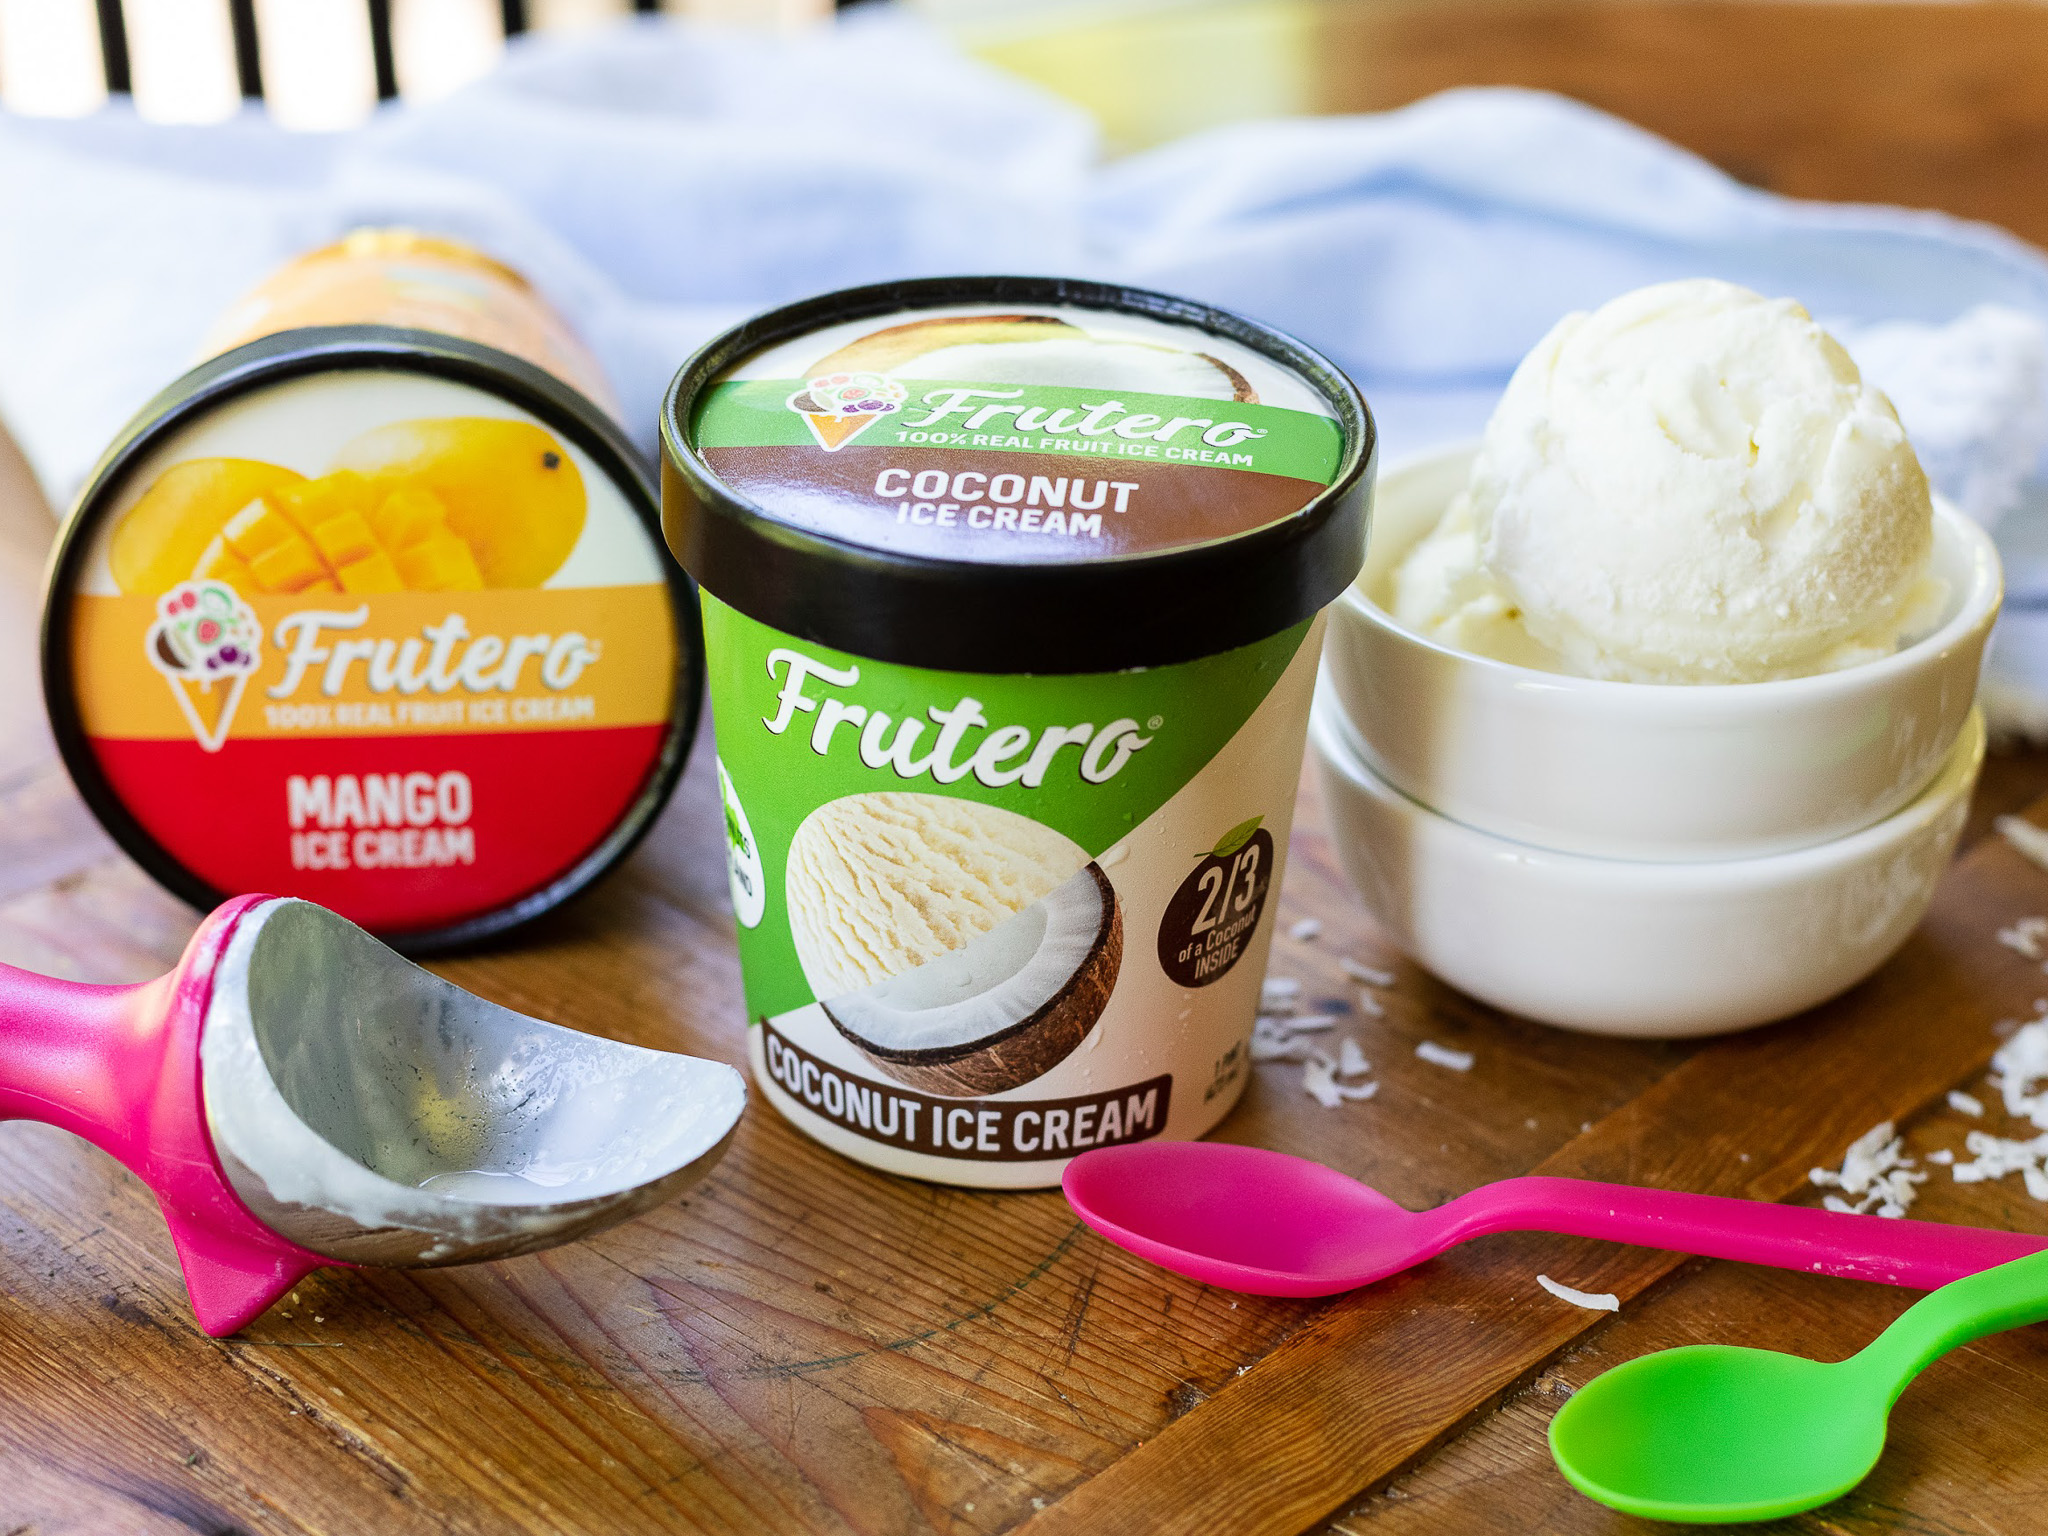 Get Frutero Ice Cream Pints For Just $1.85 At Publix (Regular Price $5.69)